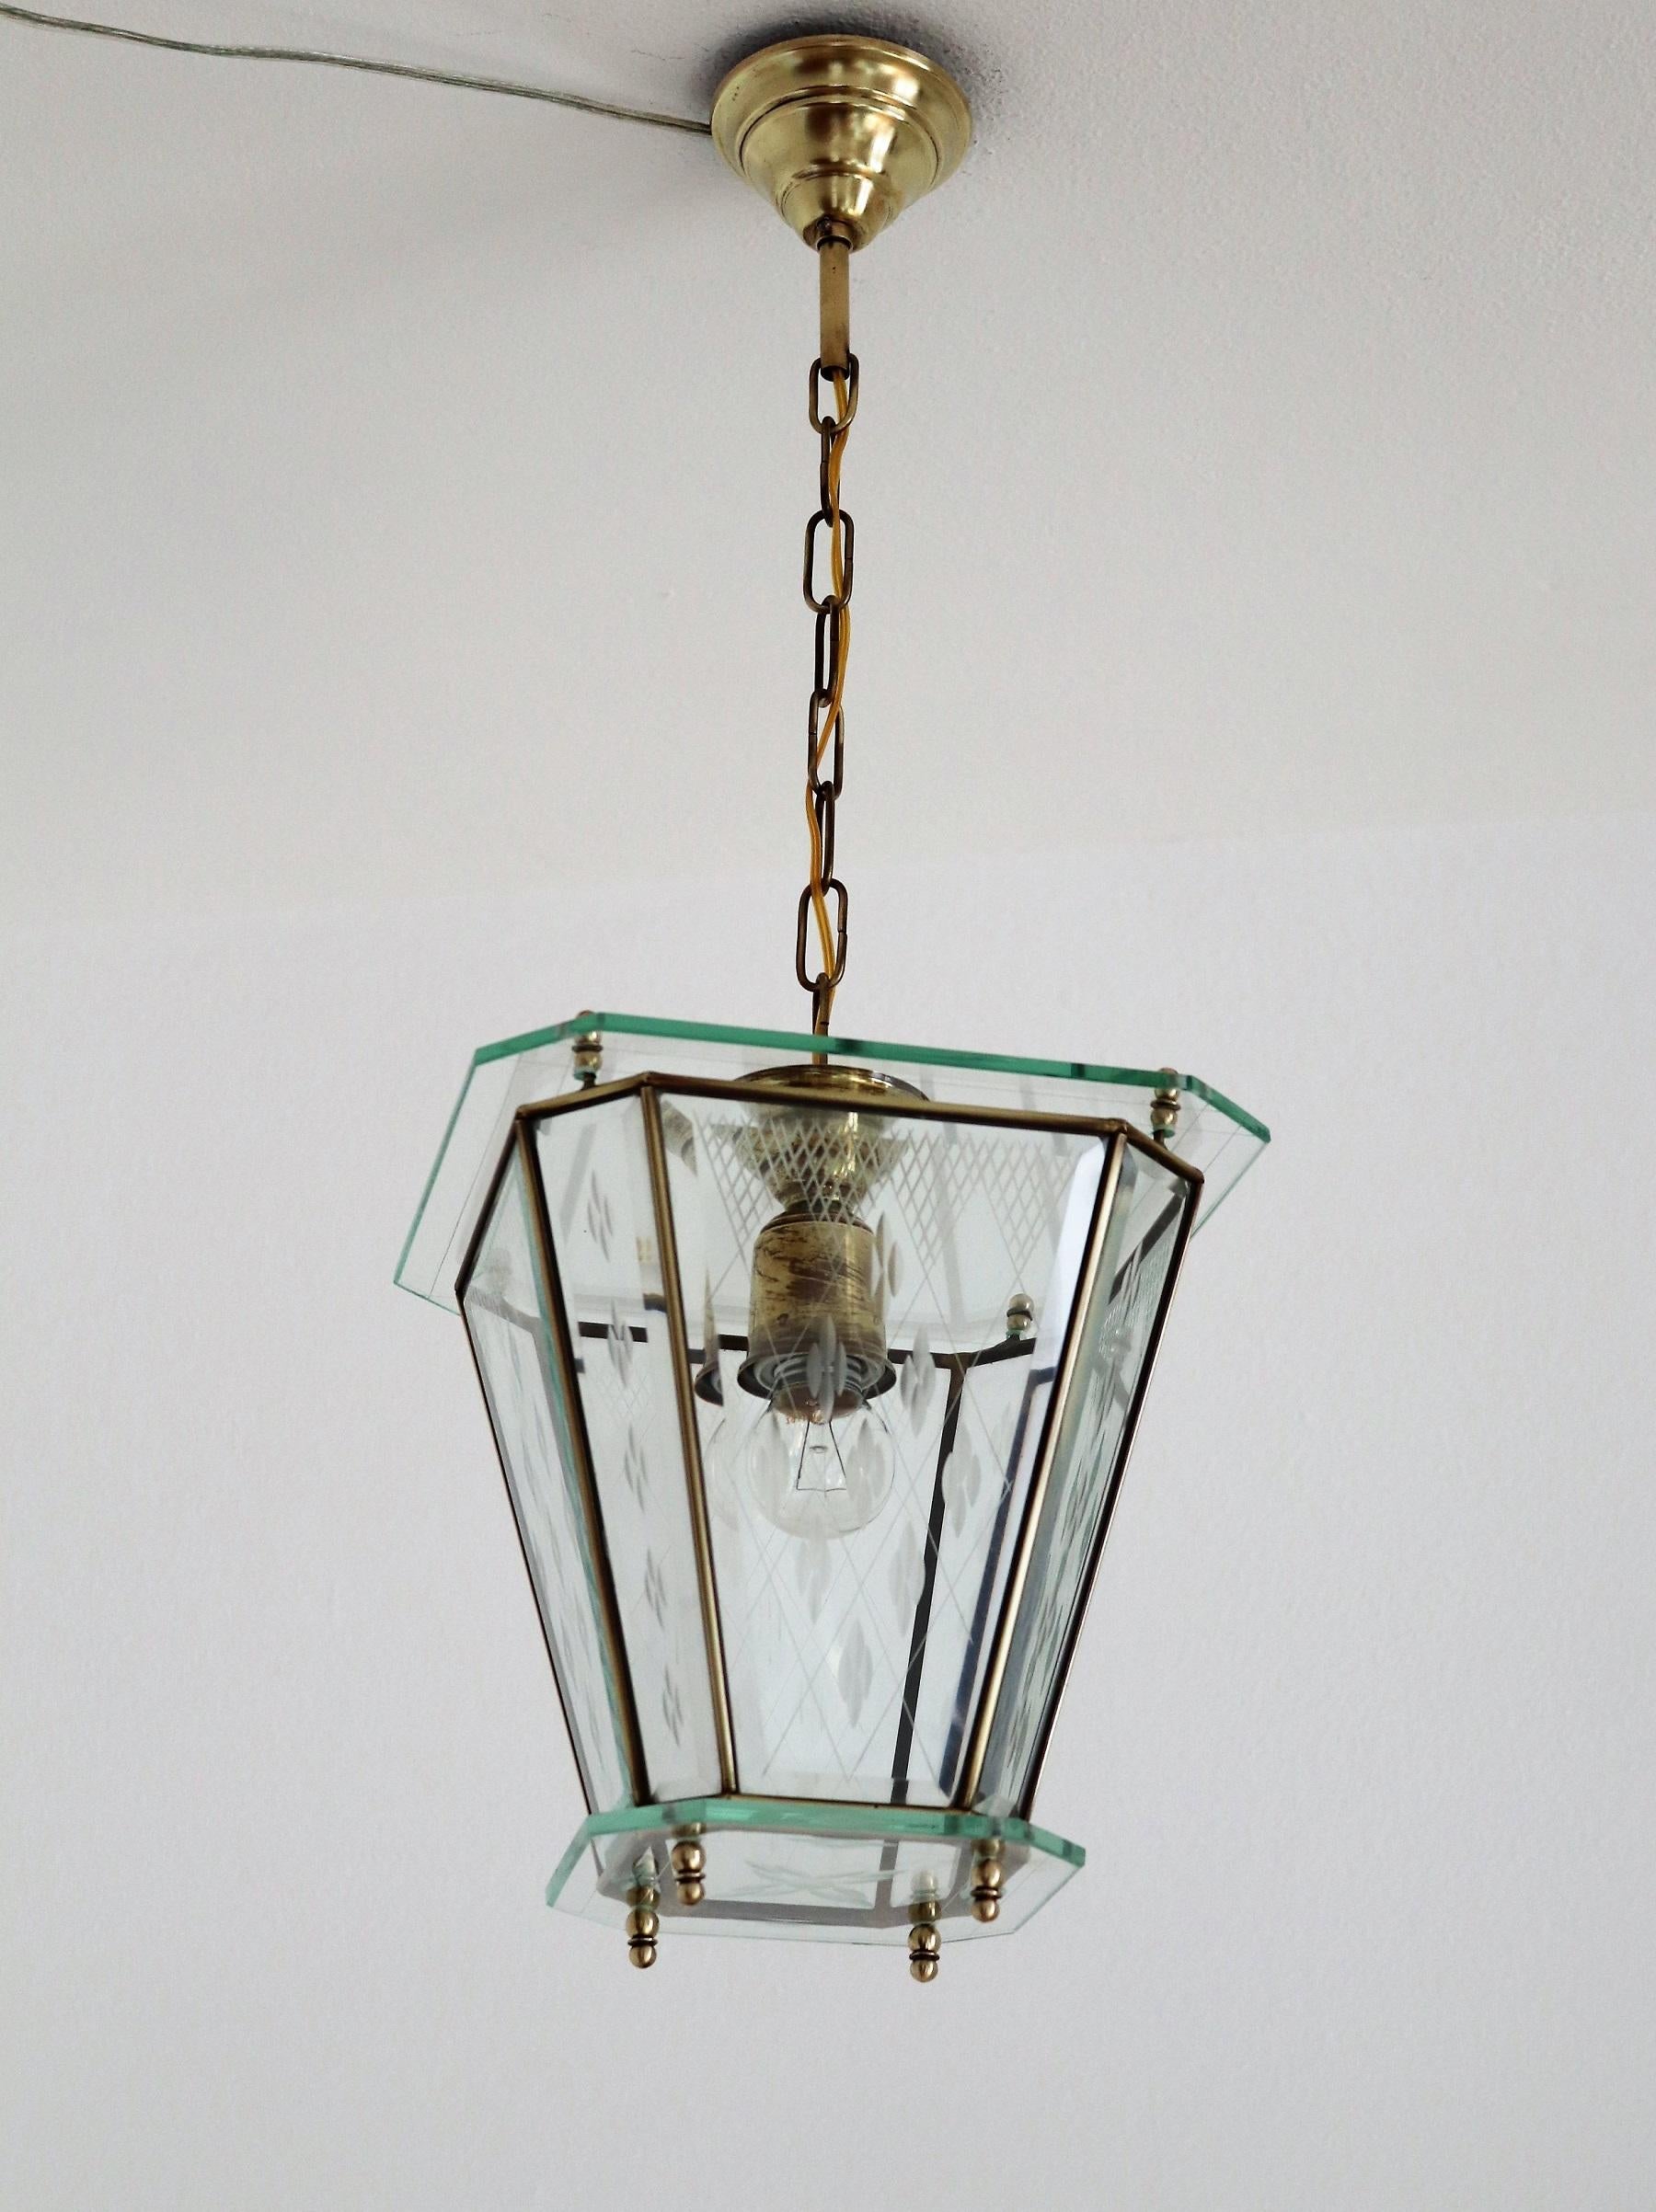 Italian Vintage Lantern in Crystal Cut Glass and Brass, 1950s For Sale 1